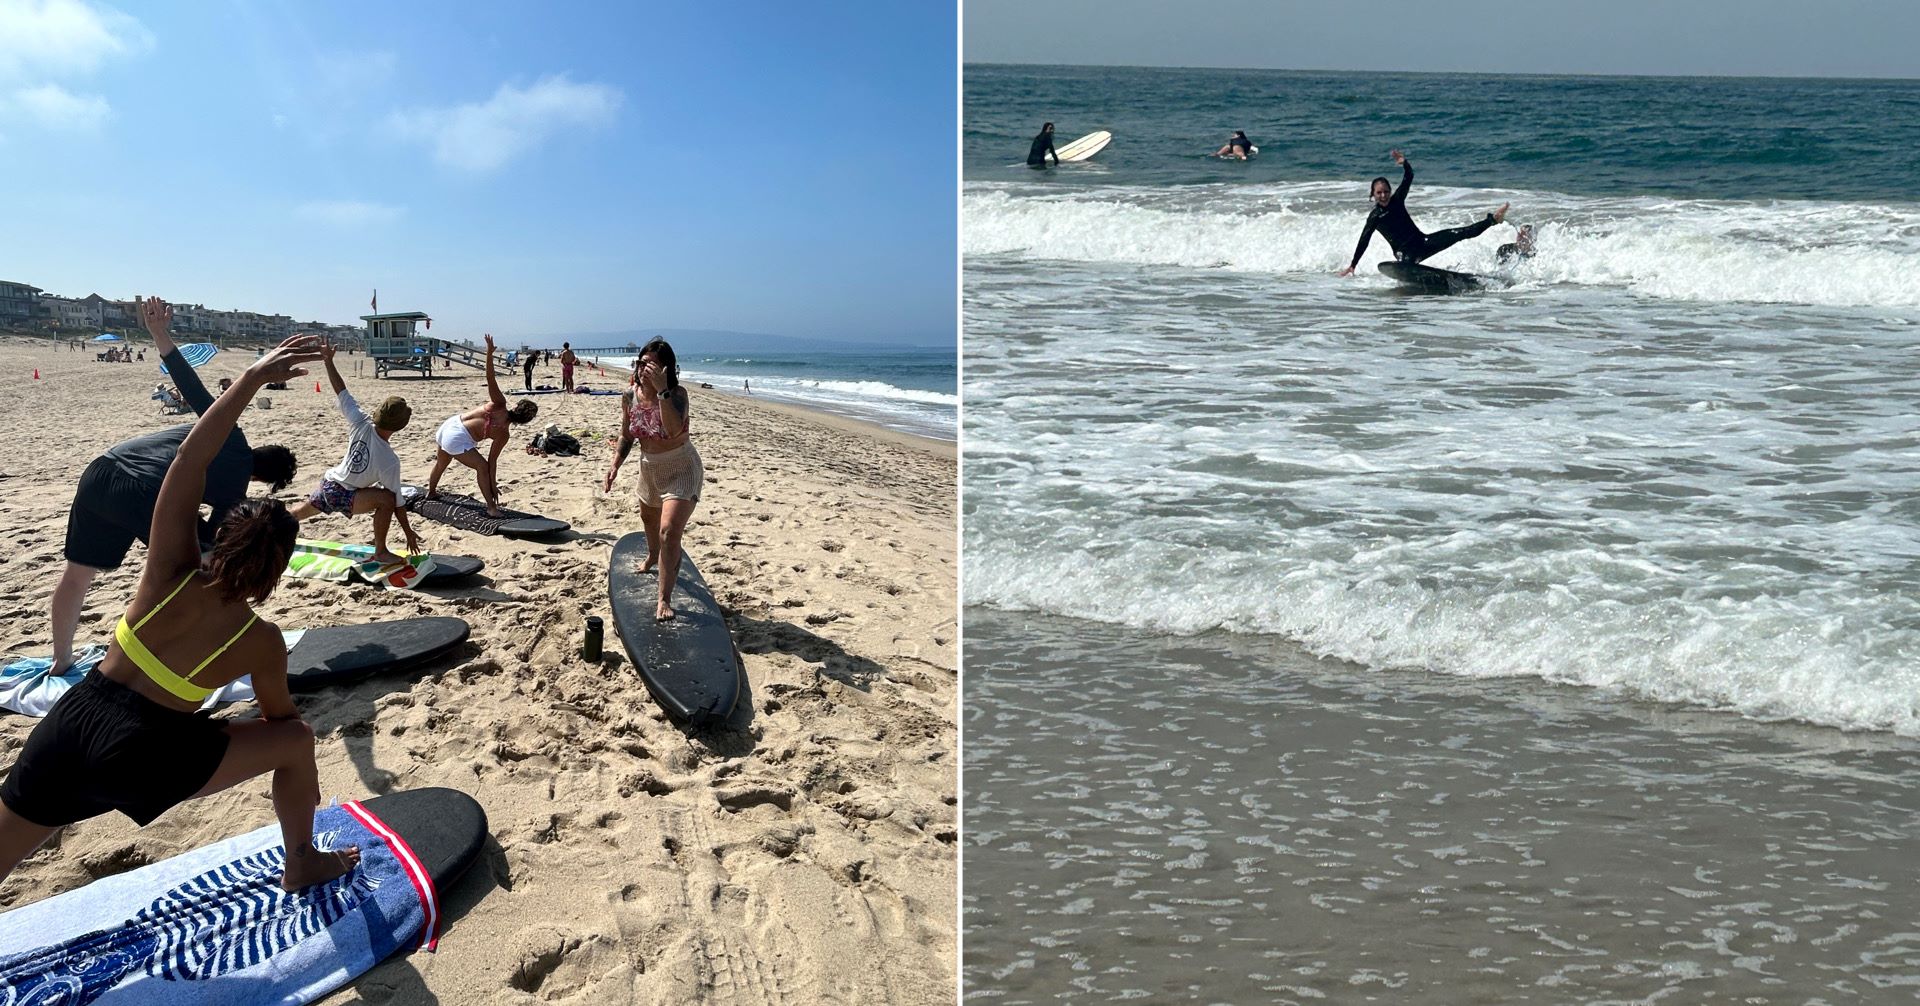 An image of beach yoga and a woman surfing.